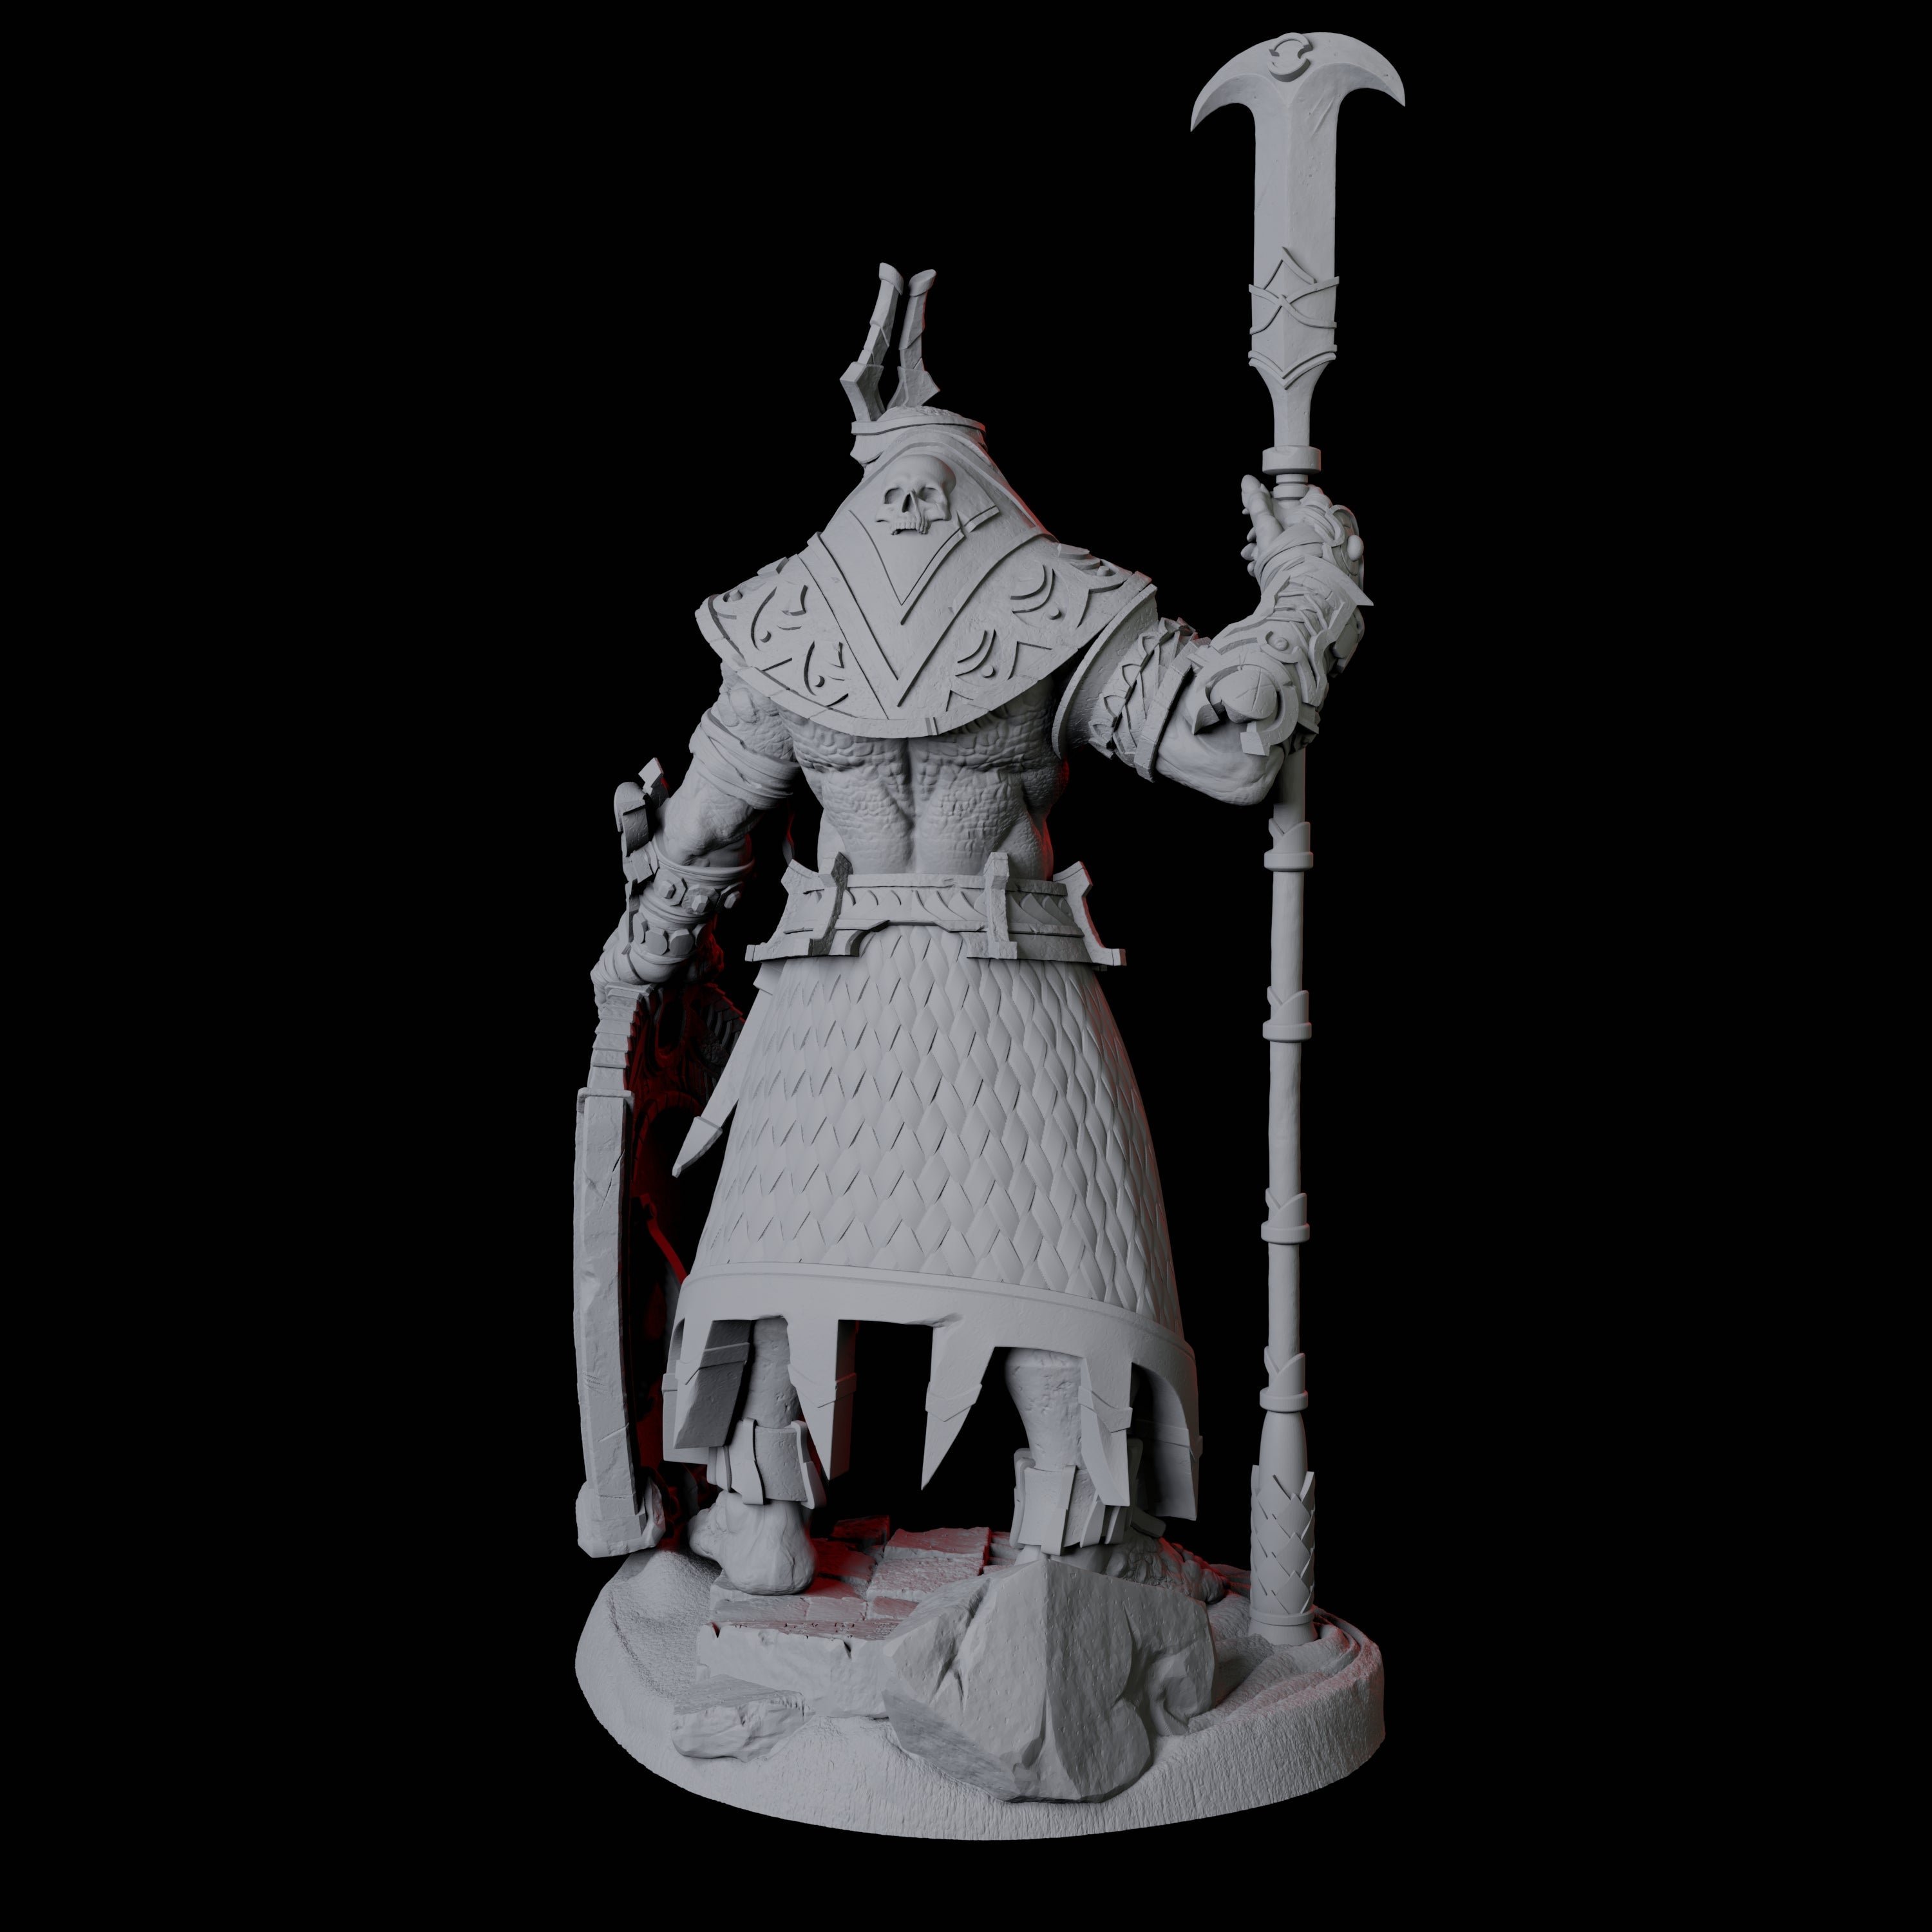 Saurian War Priest D Miniature for Dungeons and Dragons, Pathfinder or other TTRPGs